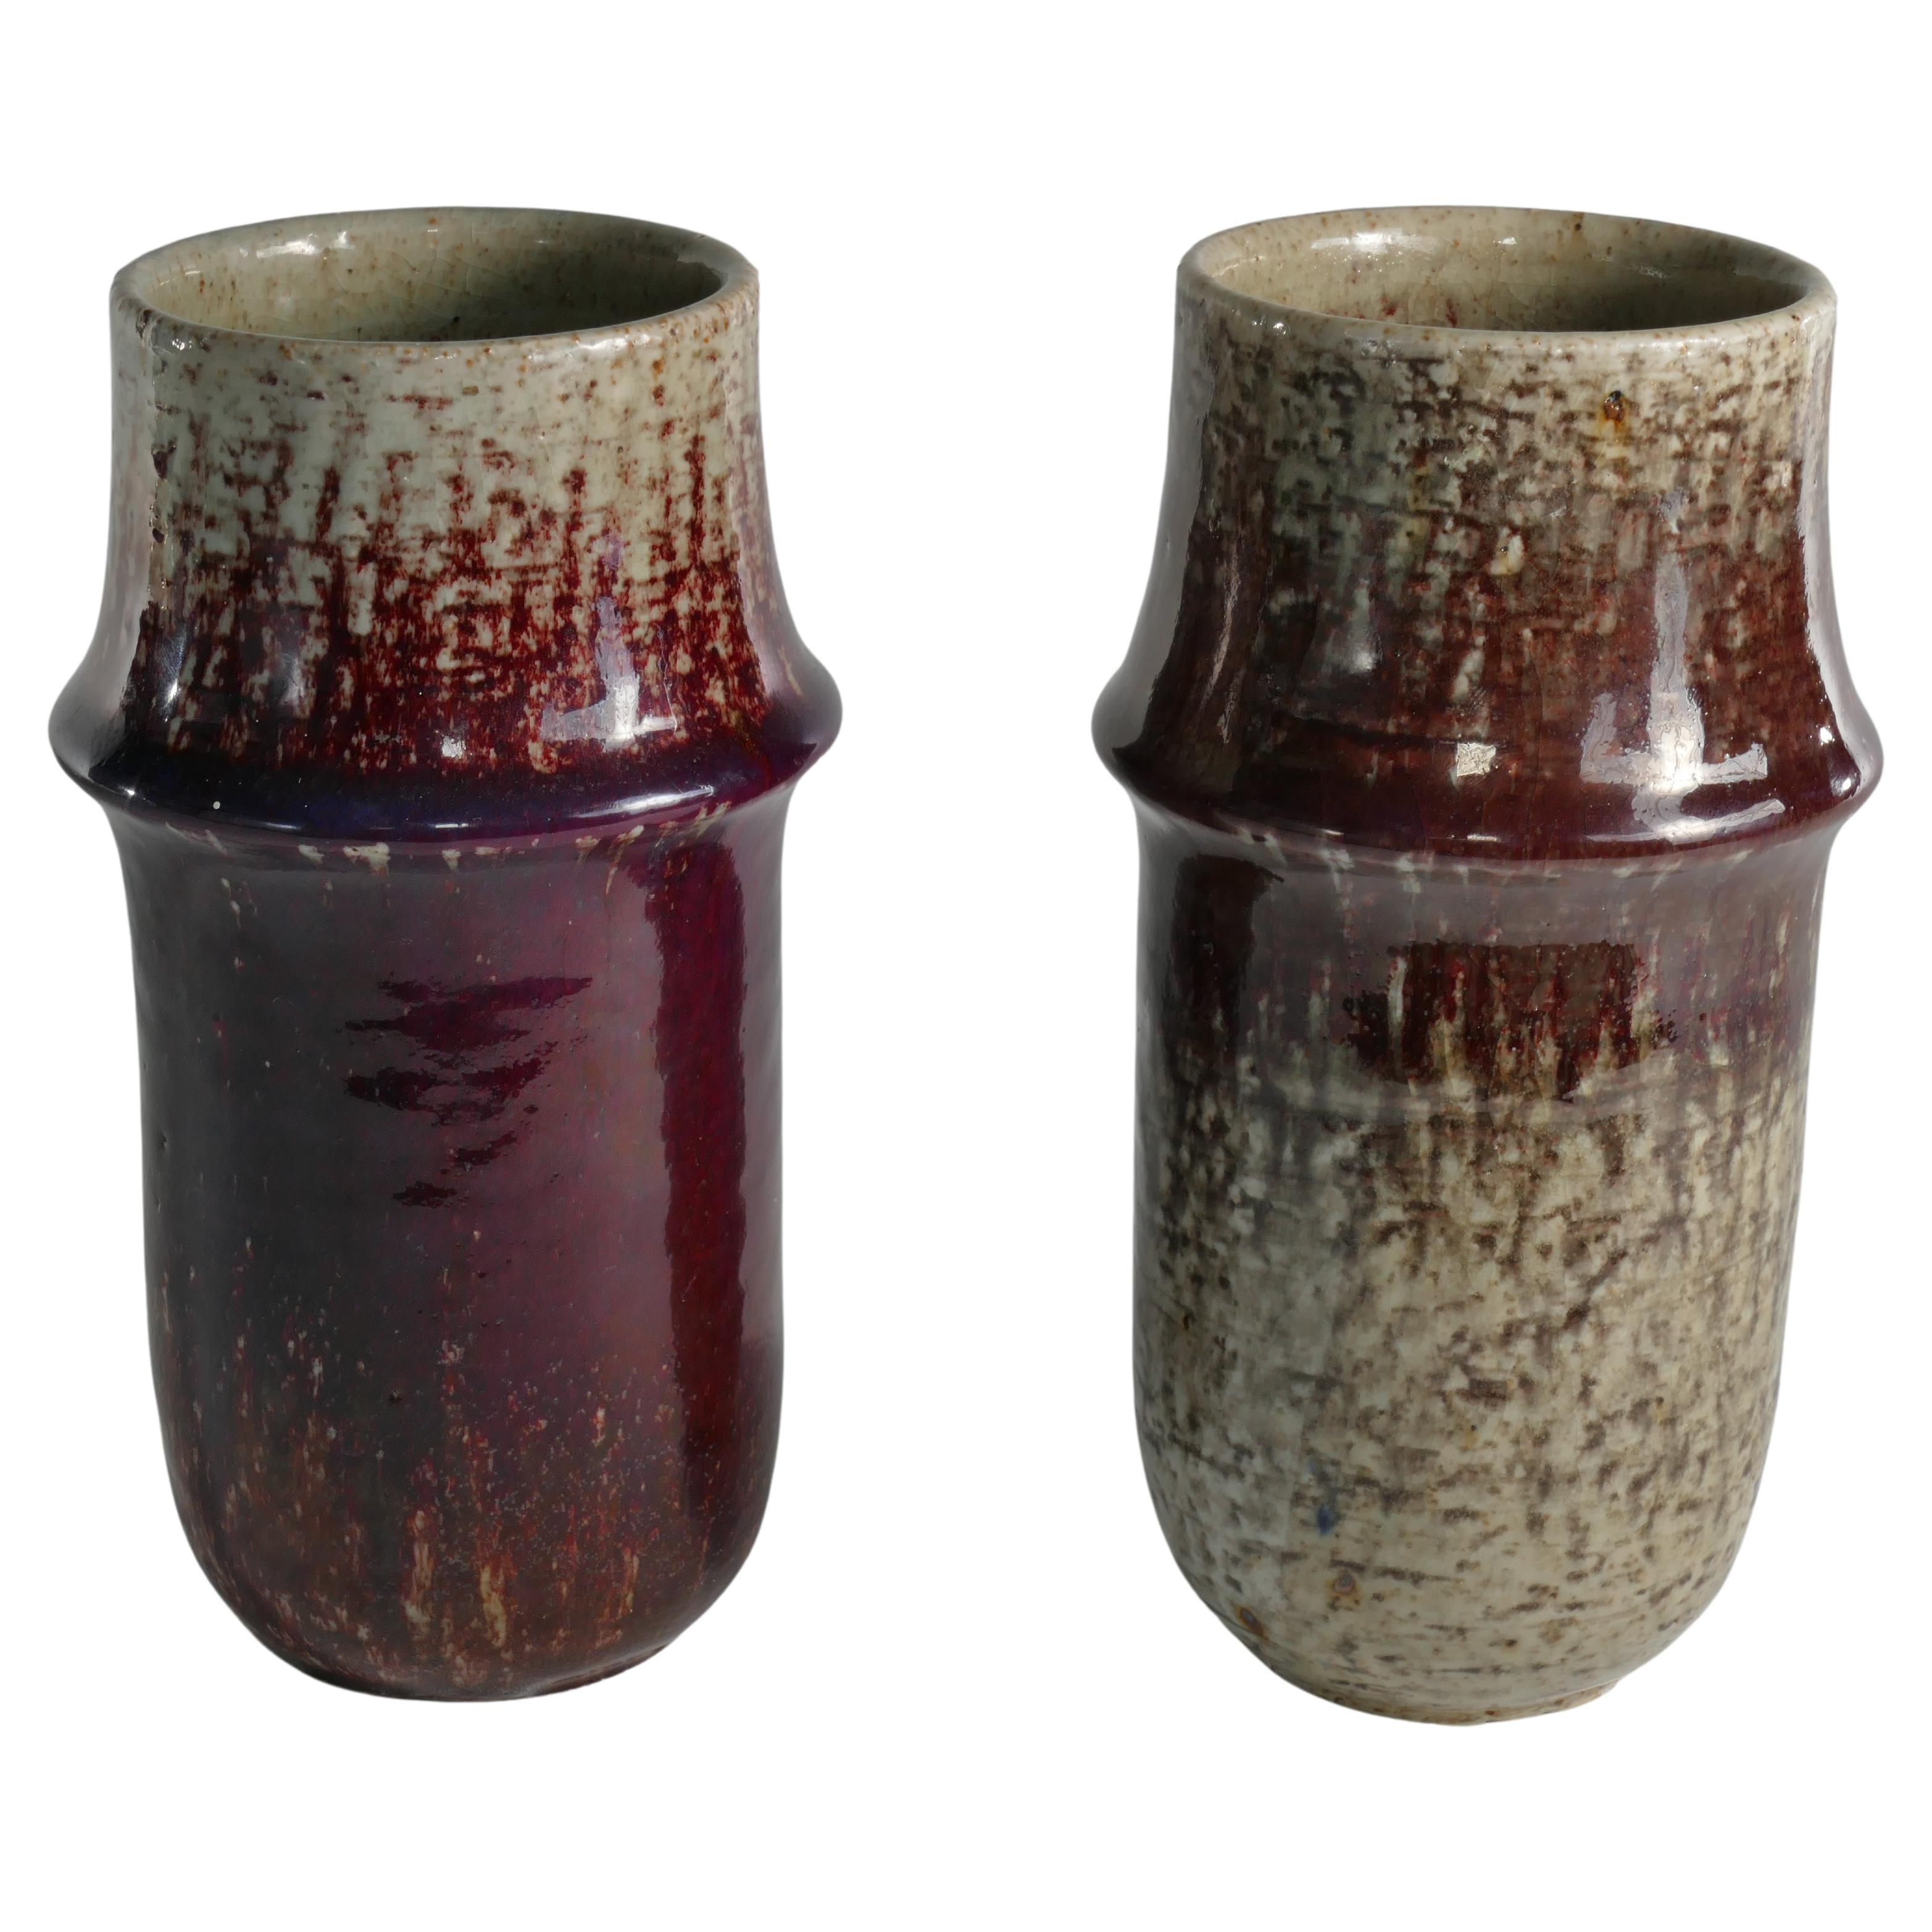 This stunning set of 2 vases made of chamotte clay designed by Sylvia Leuchovius, is produced at Rörstrand atelier, signed and dated 1976. From the rare production at Rörstands named 